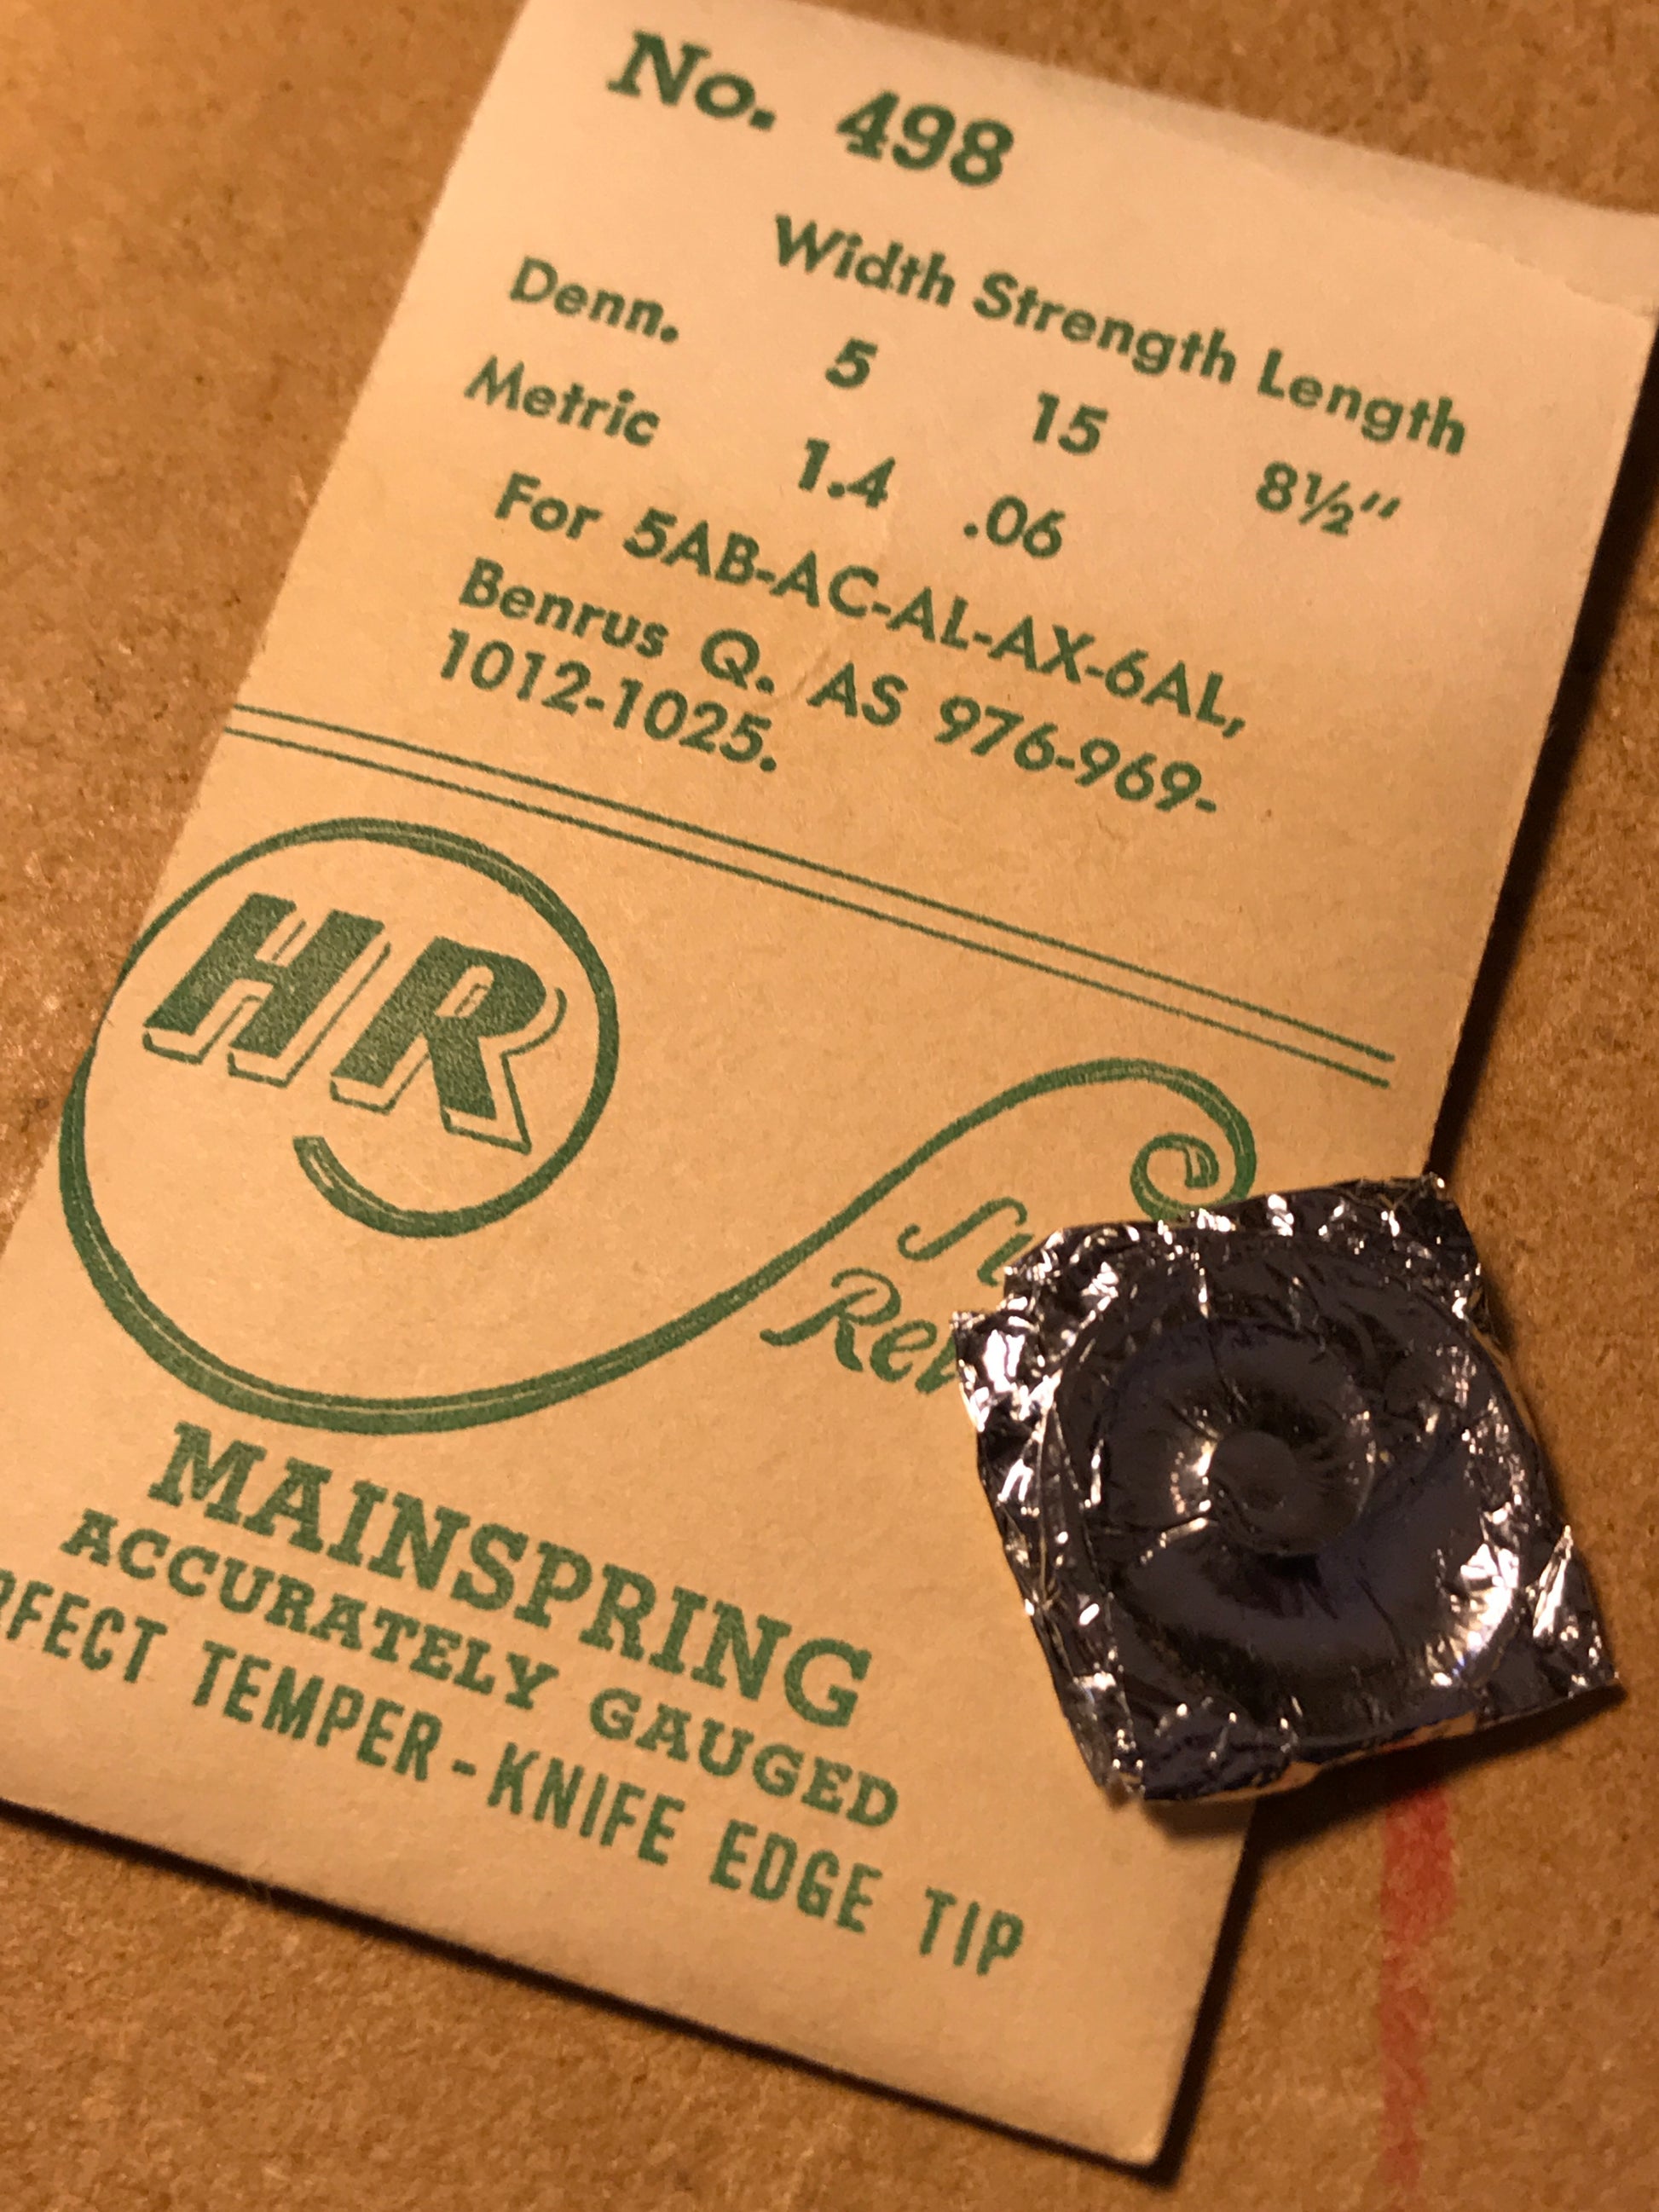 HR Mainspring No. 498 for Benrus Q, AS 976 - 1025 and a bunch of Bulova - Steel